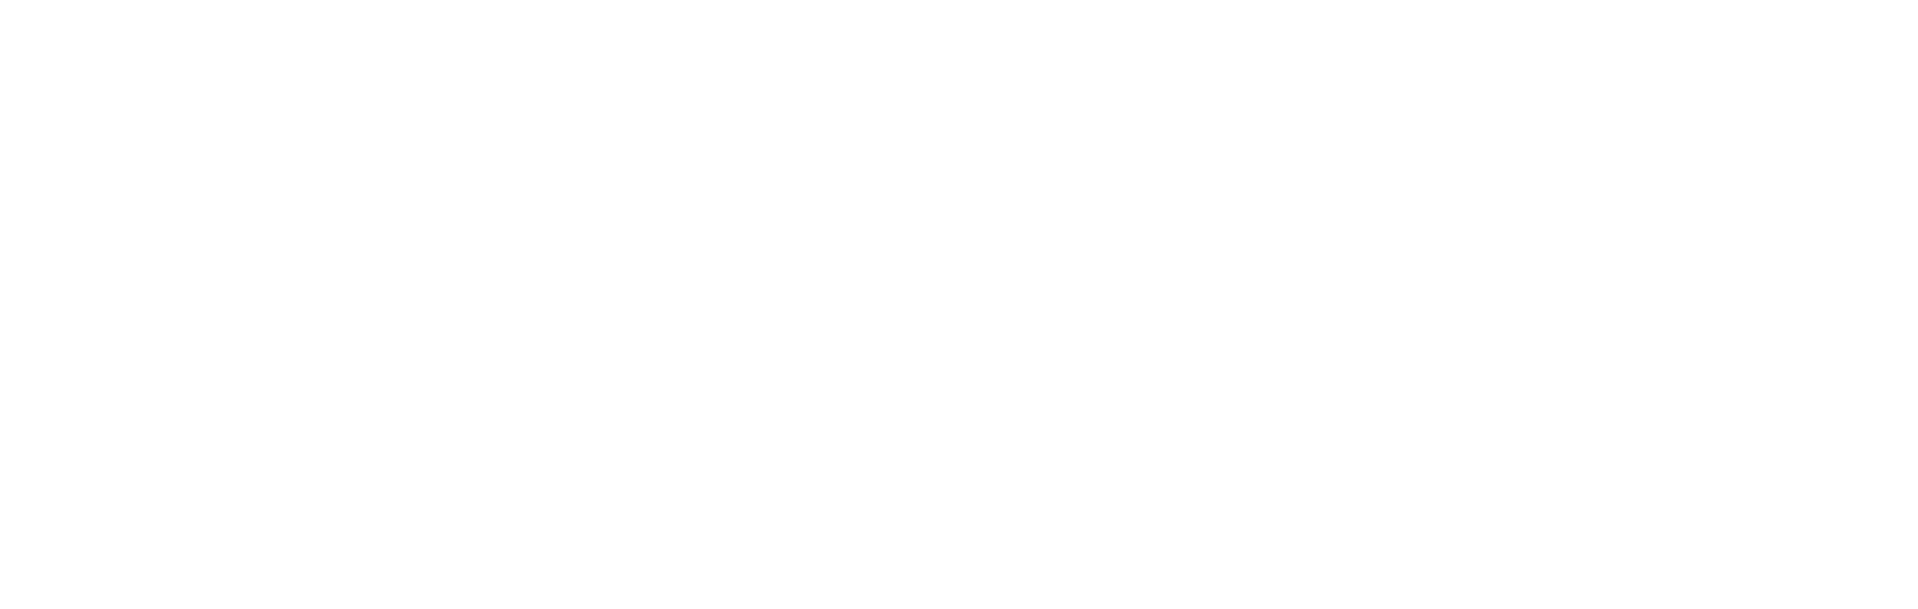 The Real Queens of Hip Hop: The Women Who Changed the Game logo